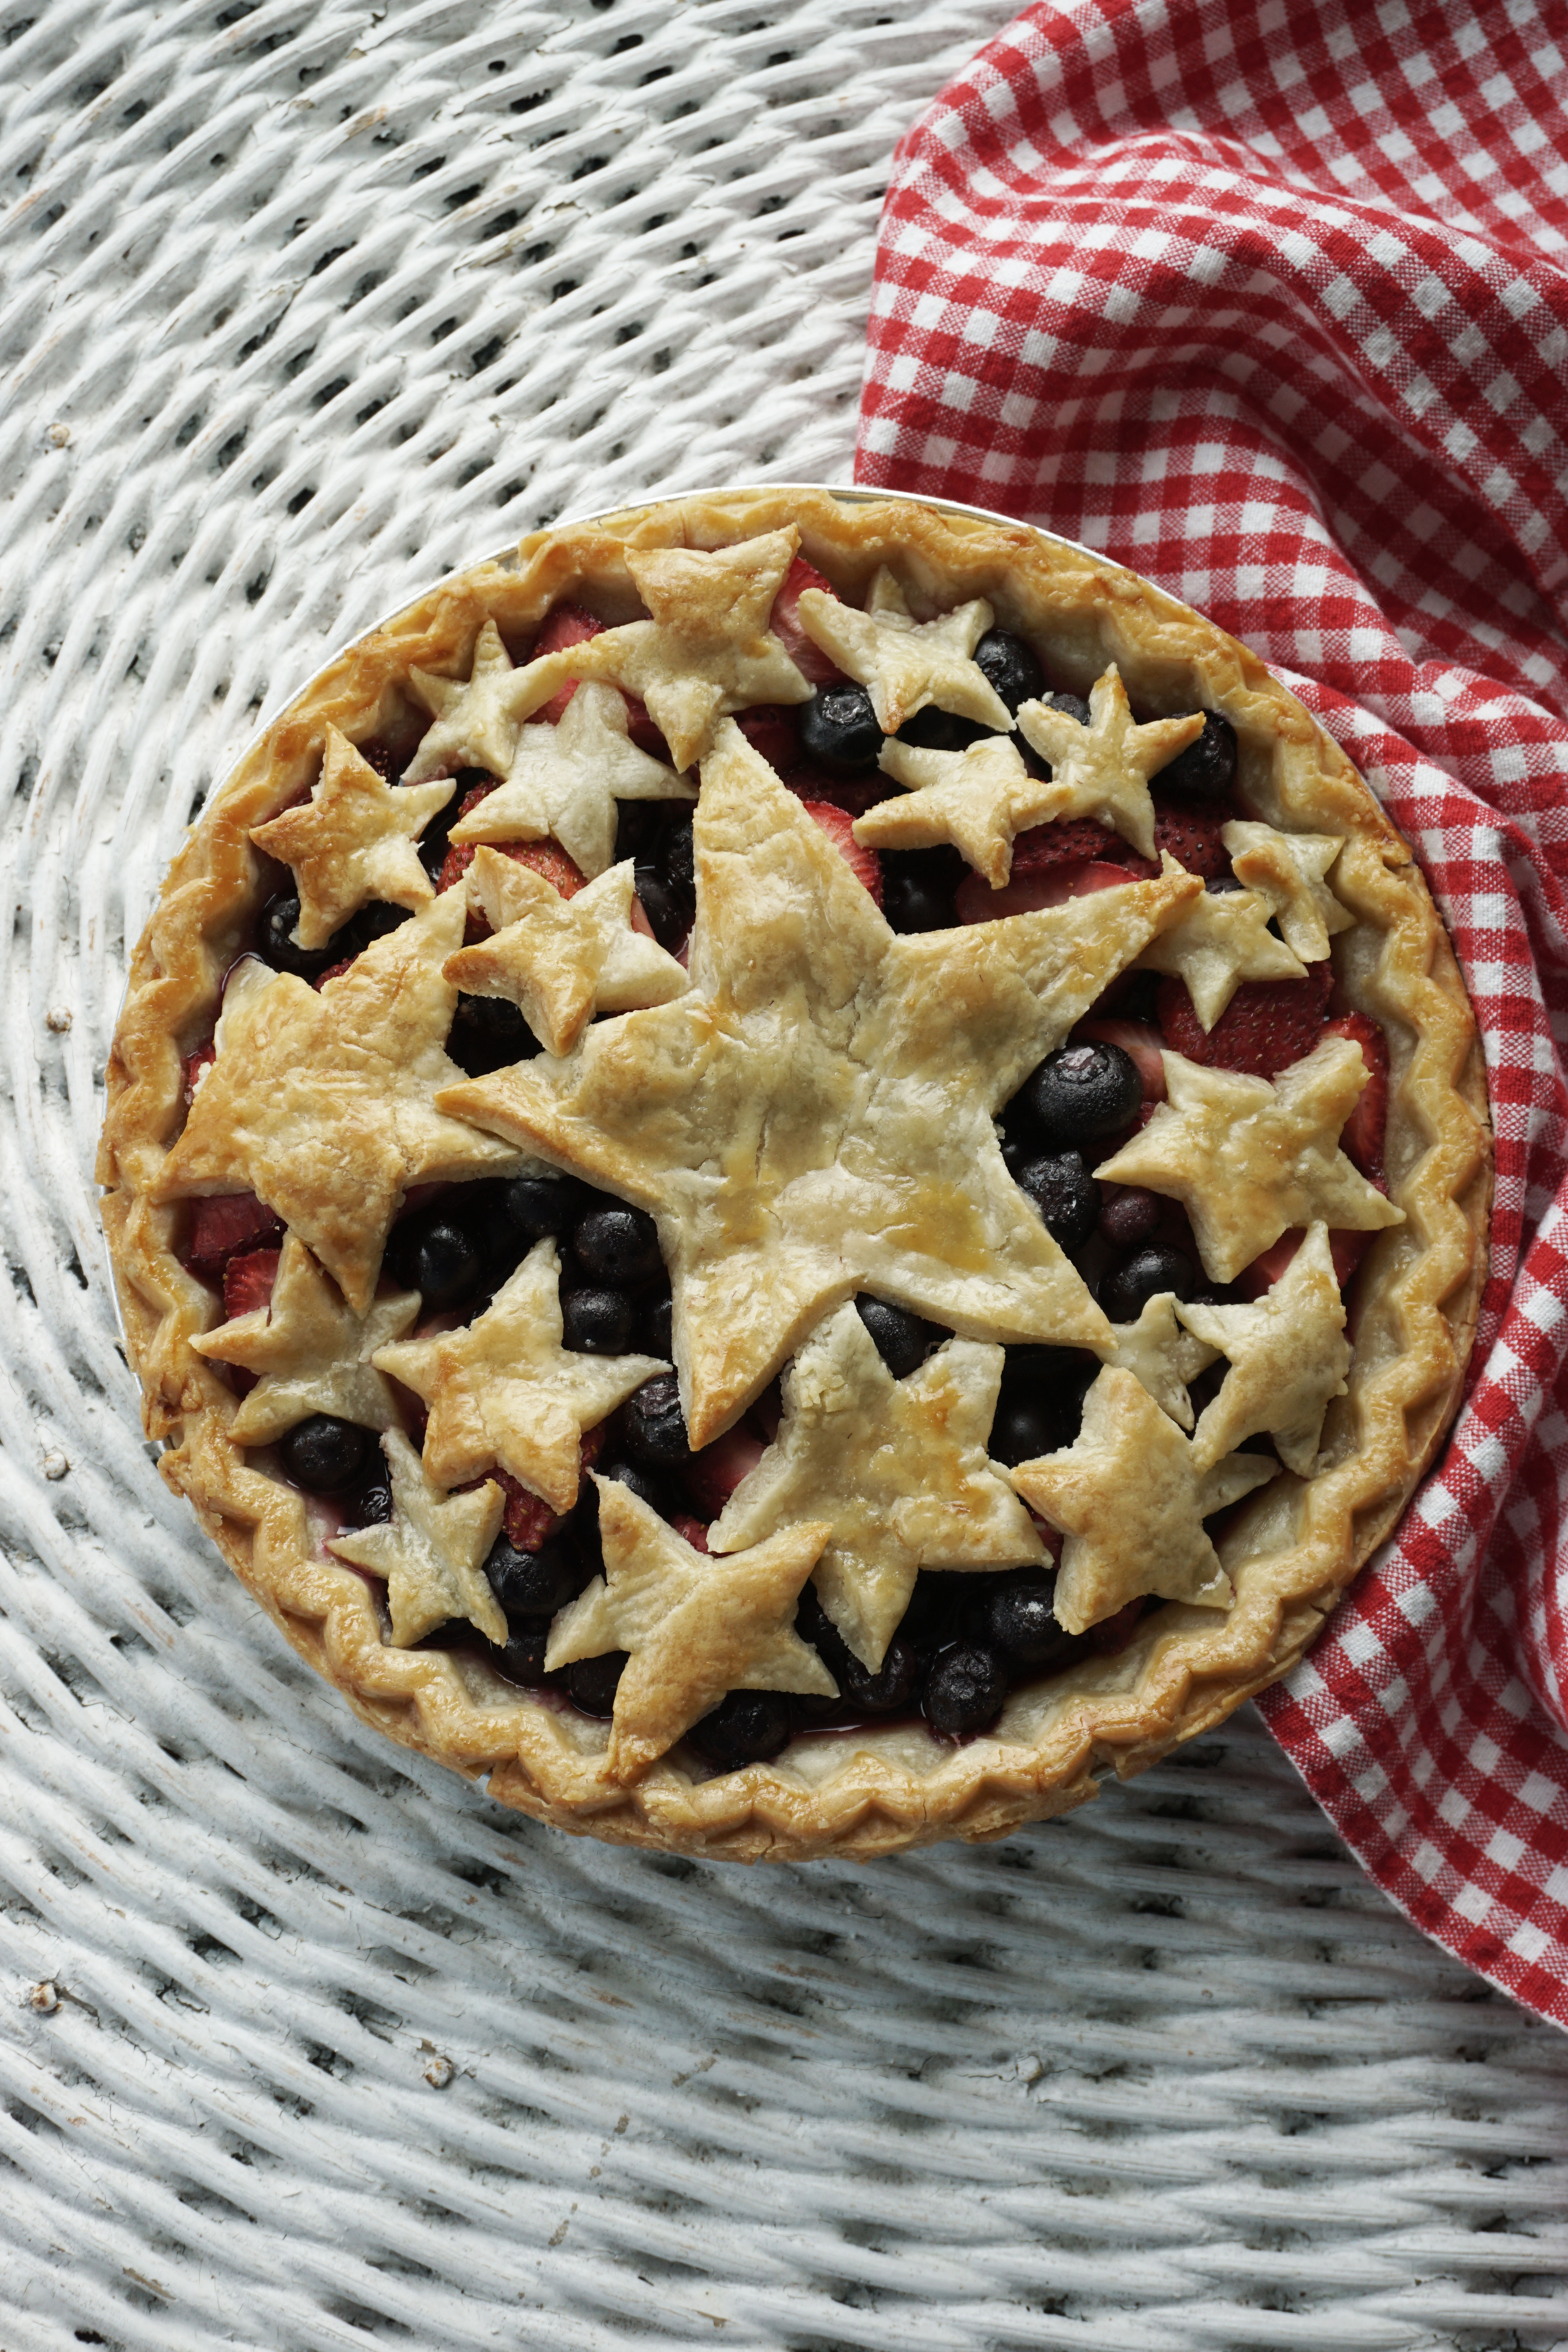 Short on time but still want to make a very berry fourth of July dessert? Make this mixed berry pie with store bought crust! Its yummy and patriotic!